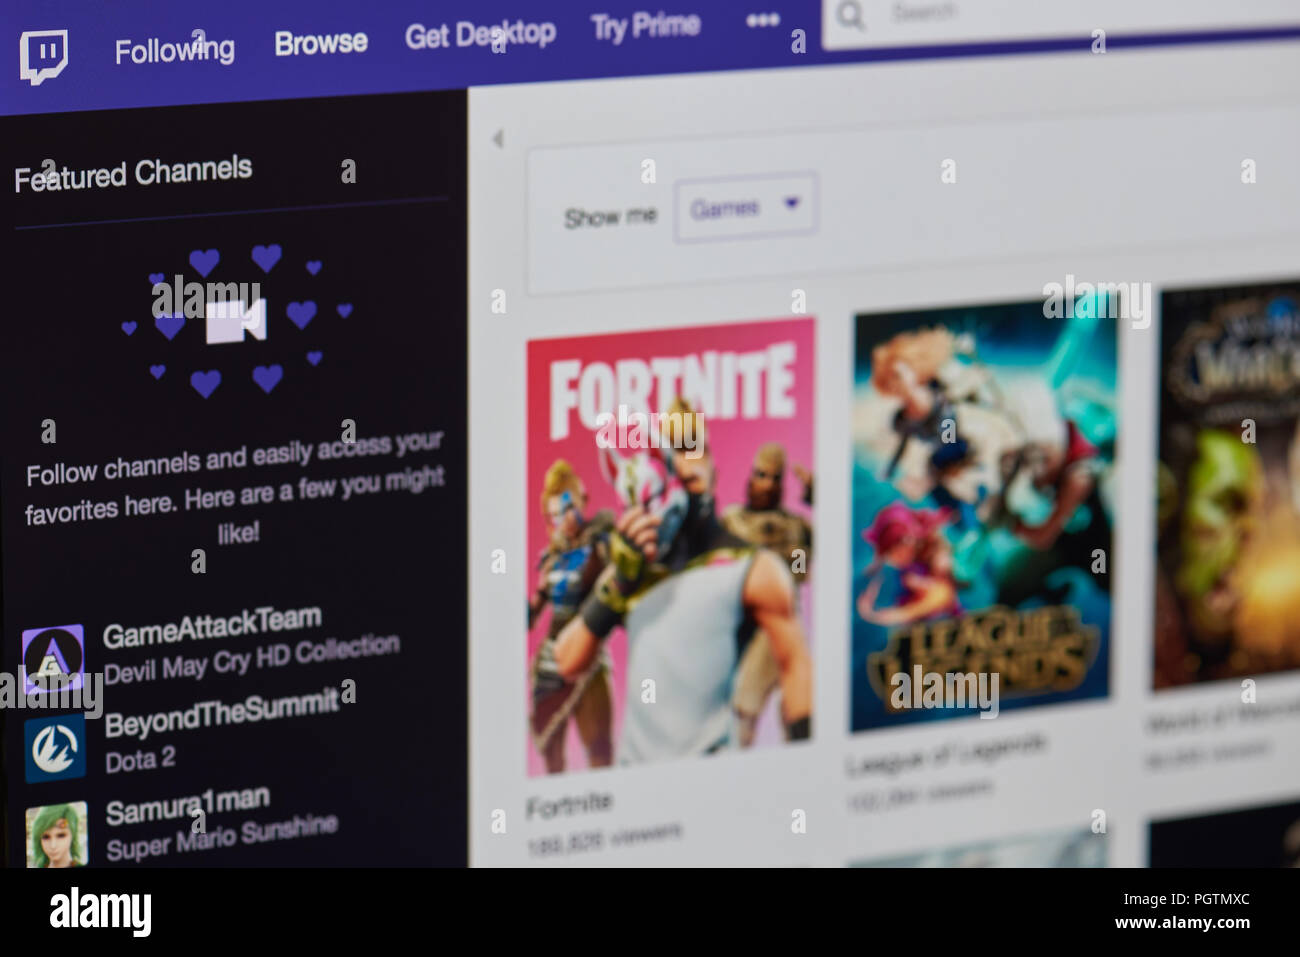 New york, USA - august 28, 2018: Twitch game stram service on laptop screen background close up view Stock Photo